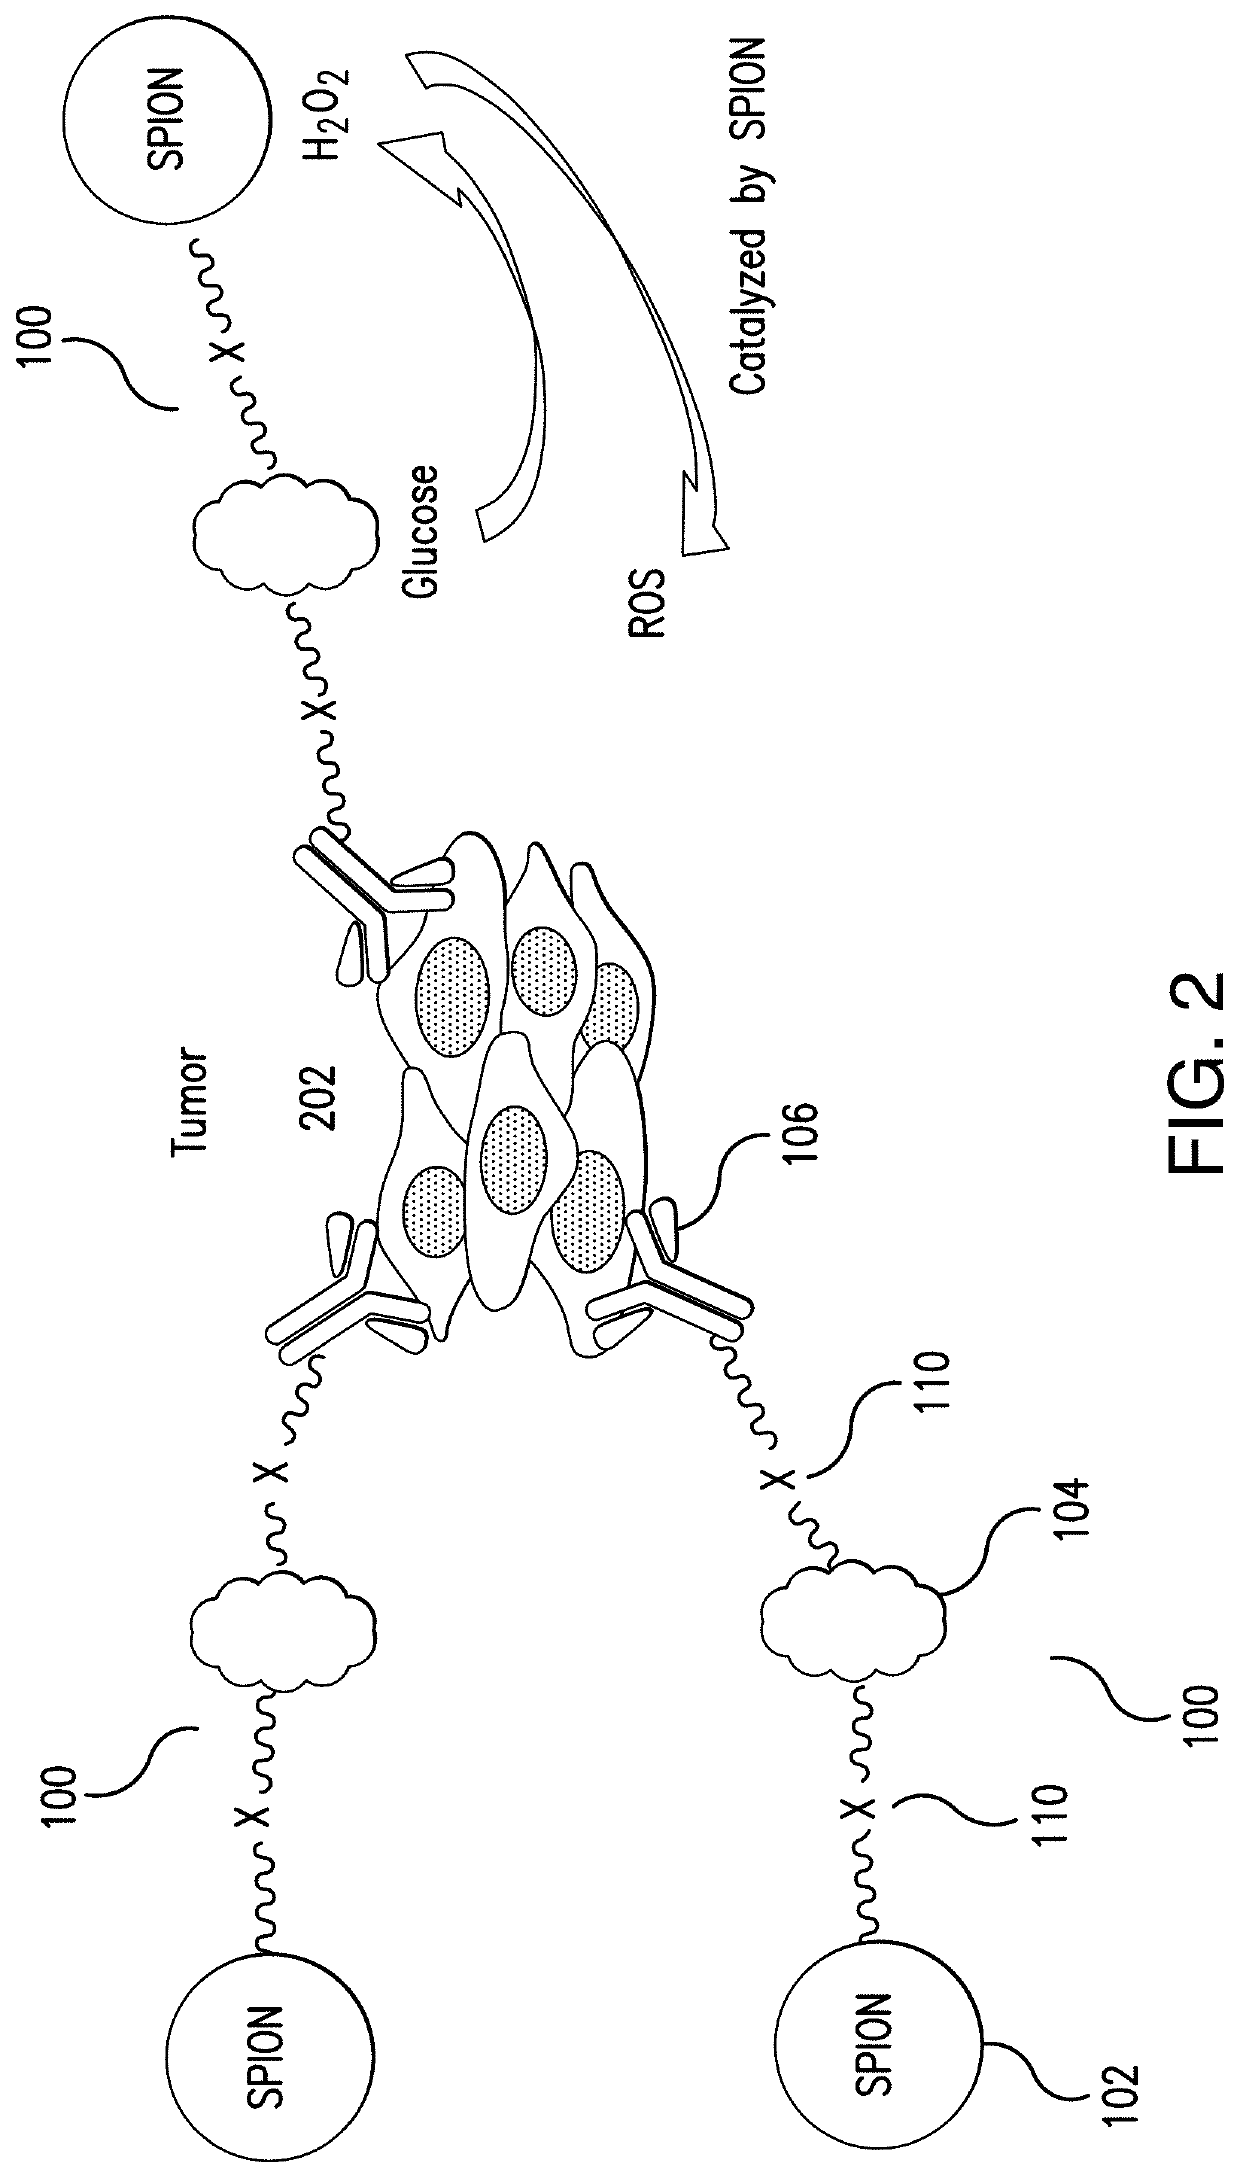 Glucose oxidase-nanoparticle bioconjugates for cancer treatment and uses thereof